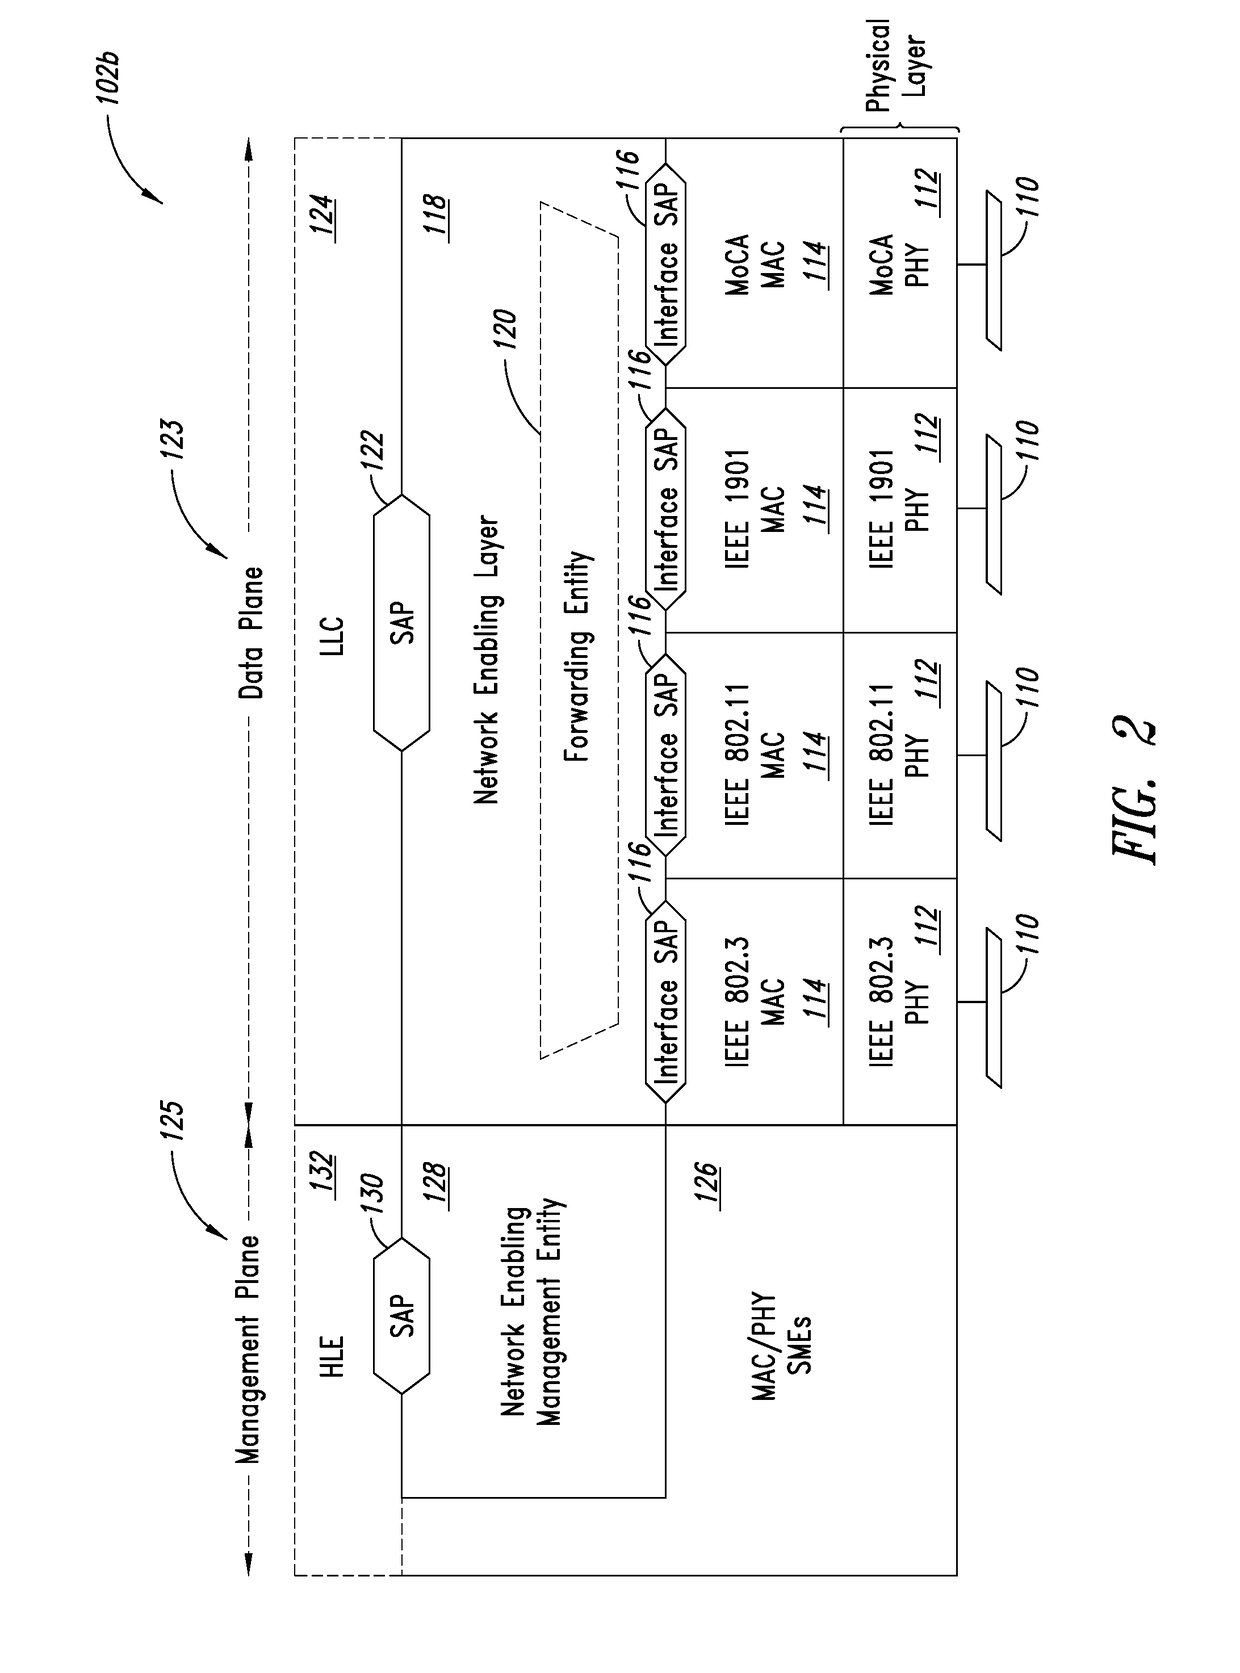 Multipath switching using per-hop virtual local area network classification